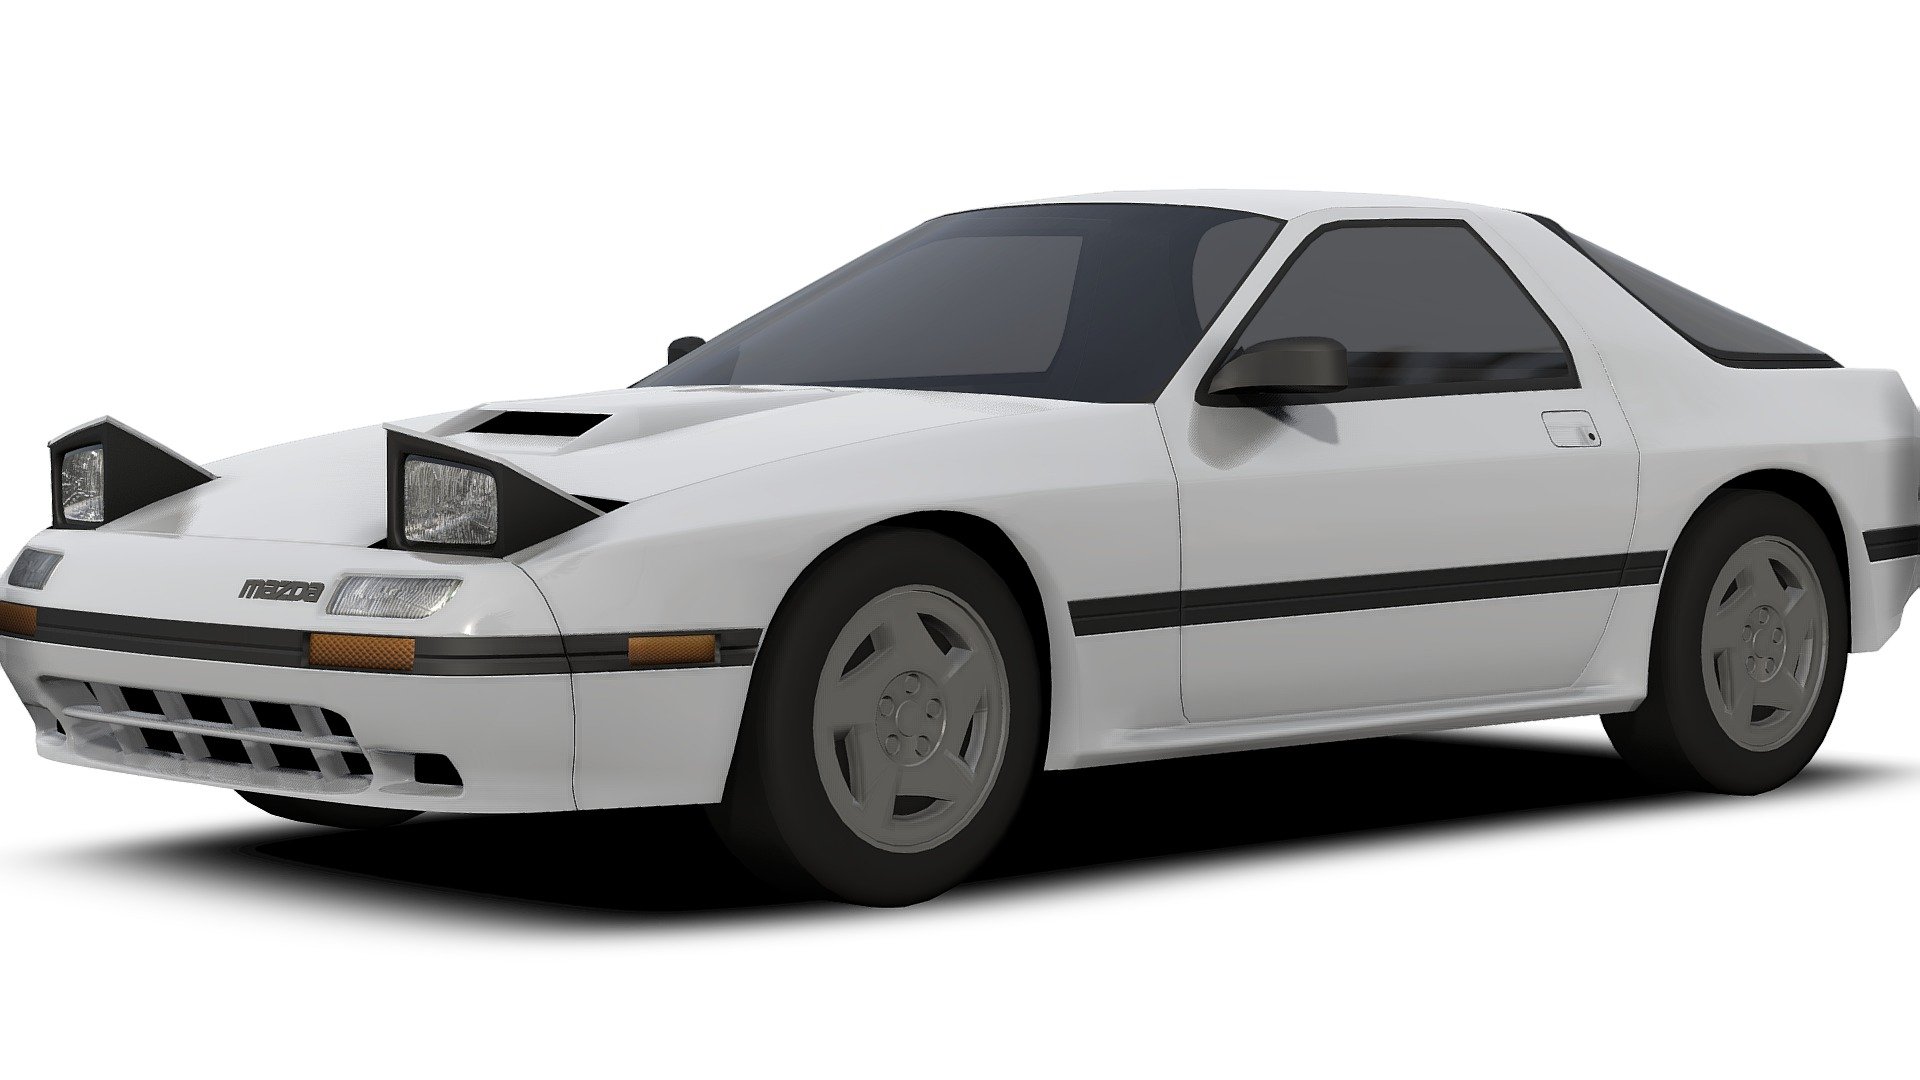 Mazda Rx 7 Fc Download Free 3d Model By Lexyc16 Lexyc16 8ac0df4